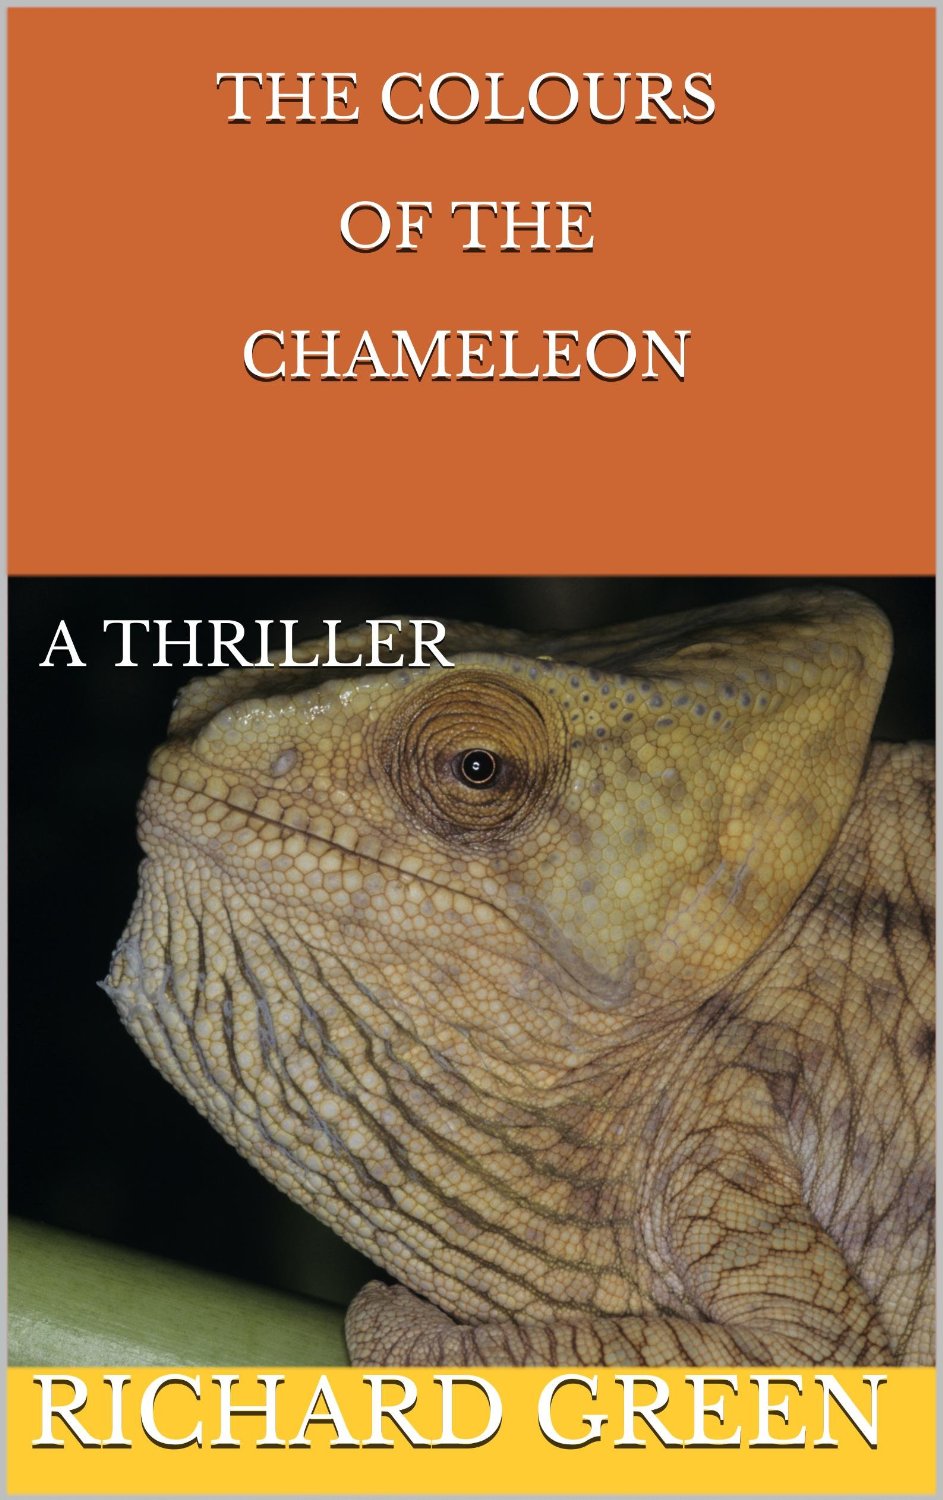 The Colours of the Chameleon by Richard Green